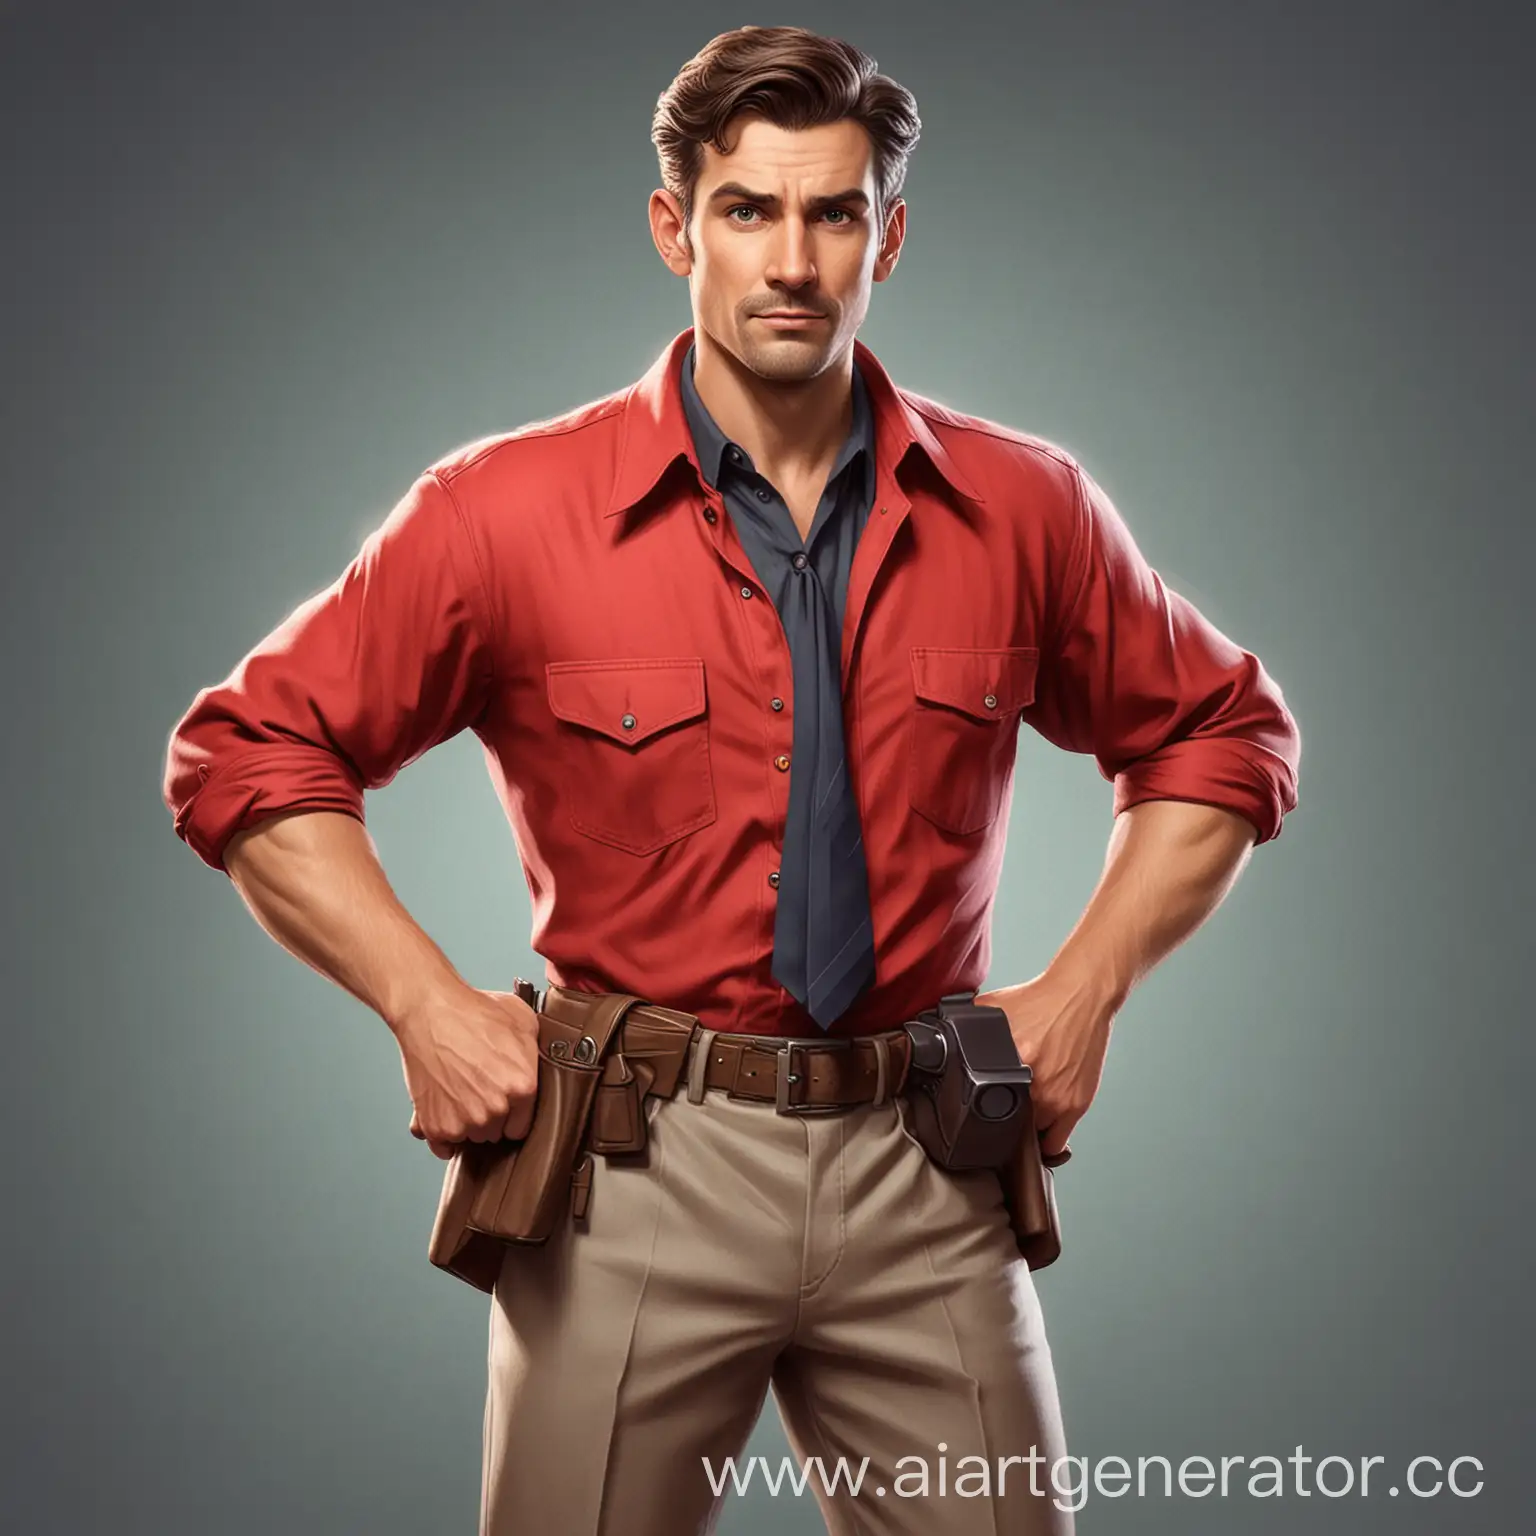 Red-Shirt-Detective-Solving-Mystery-in-Urban-Setting